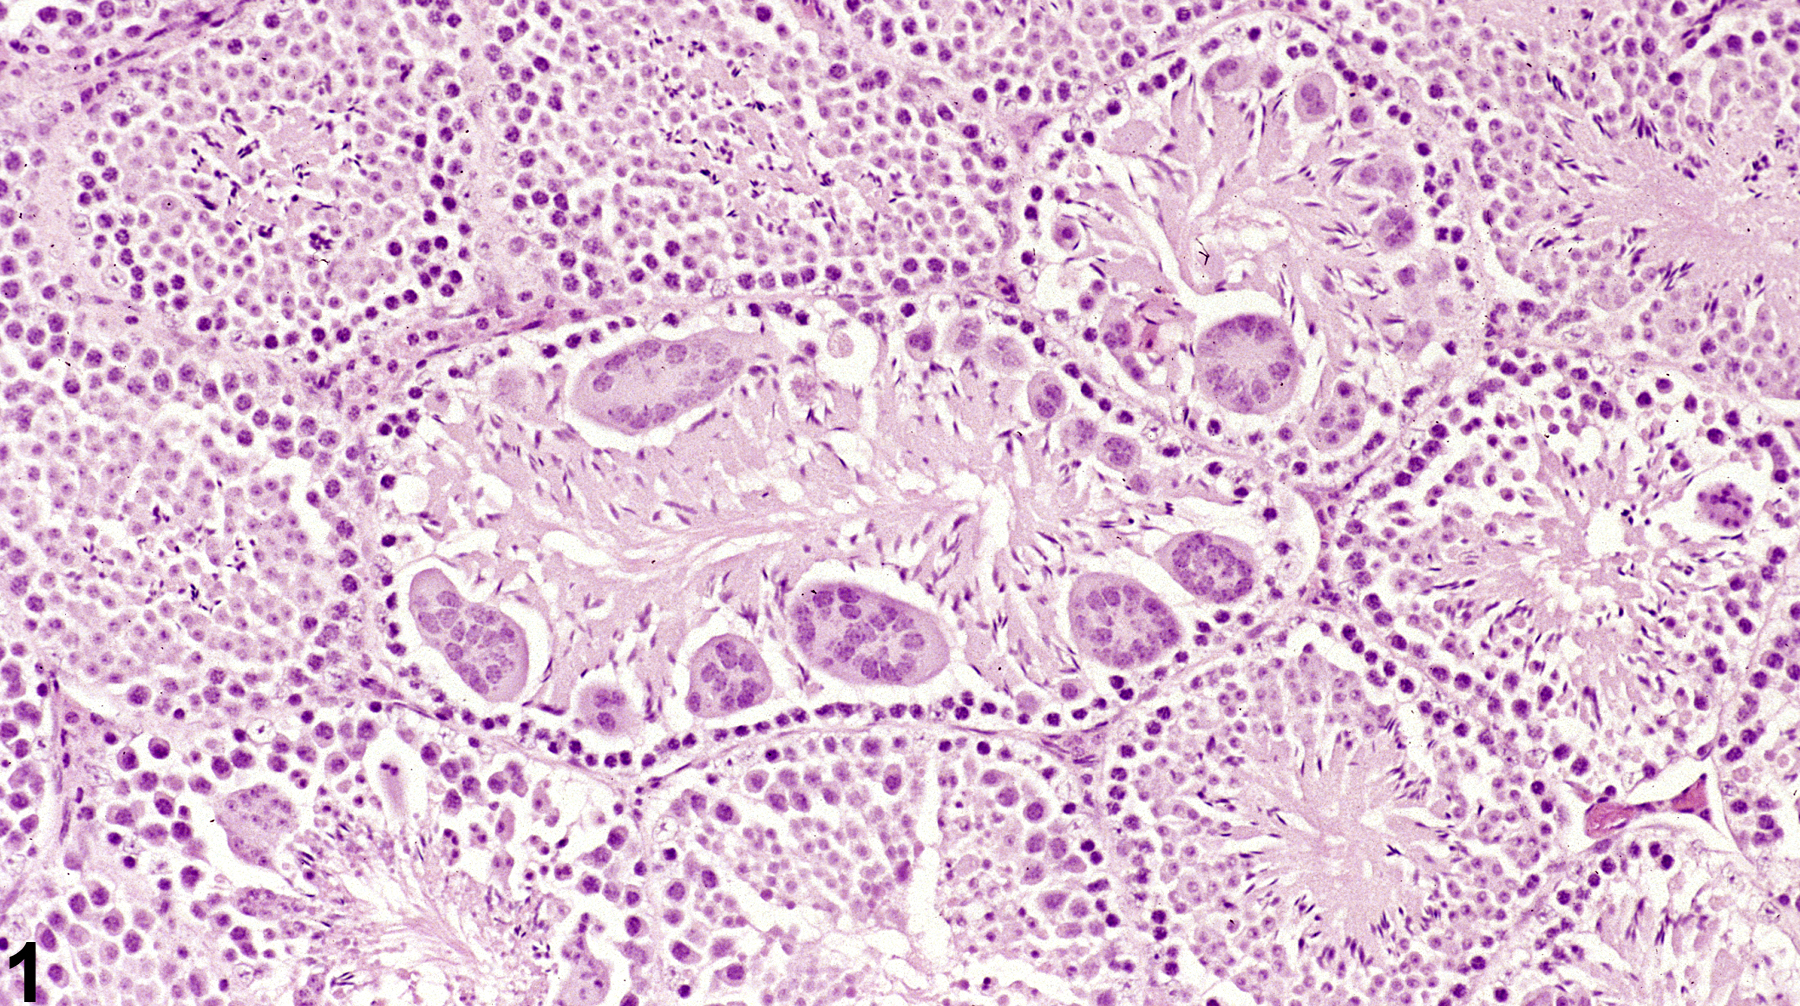 Image of seminiferous tubule giant cells in the testis from a male B6C3F1 mouse in a subchronic study